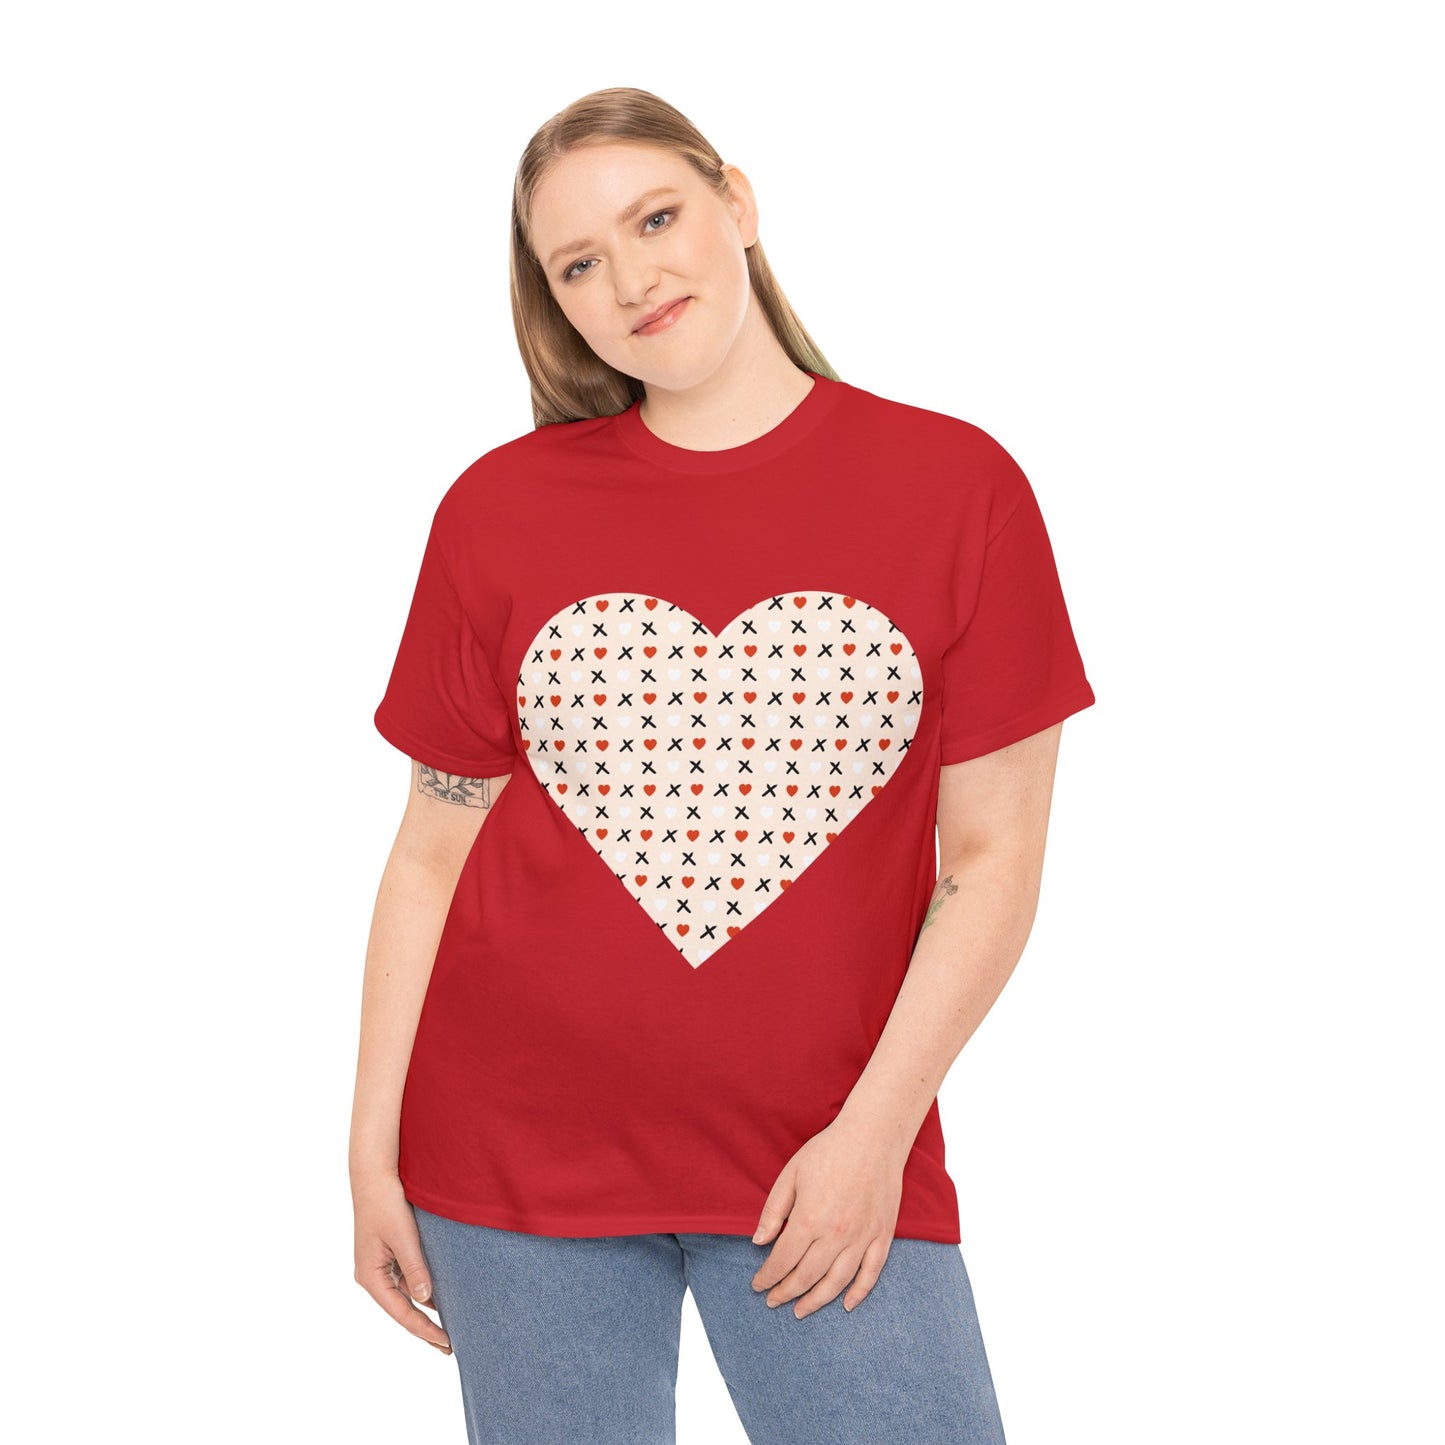 Red & White Hearts Love Pattern T-shirt: Cozy Elegance for Winter Days